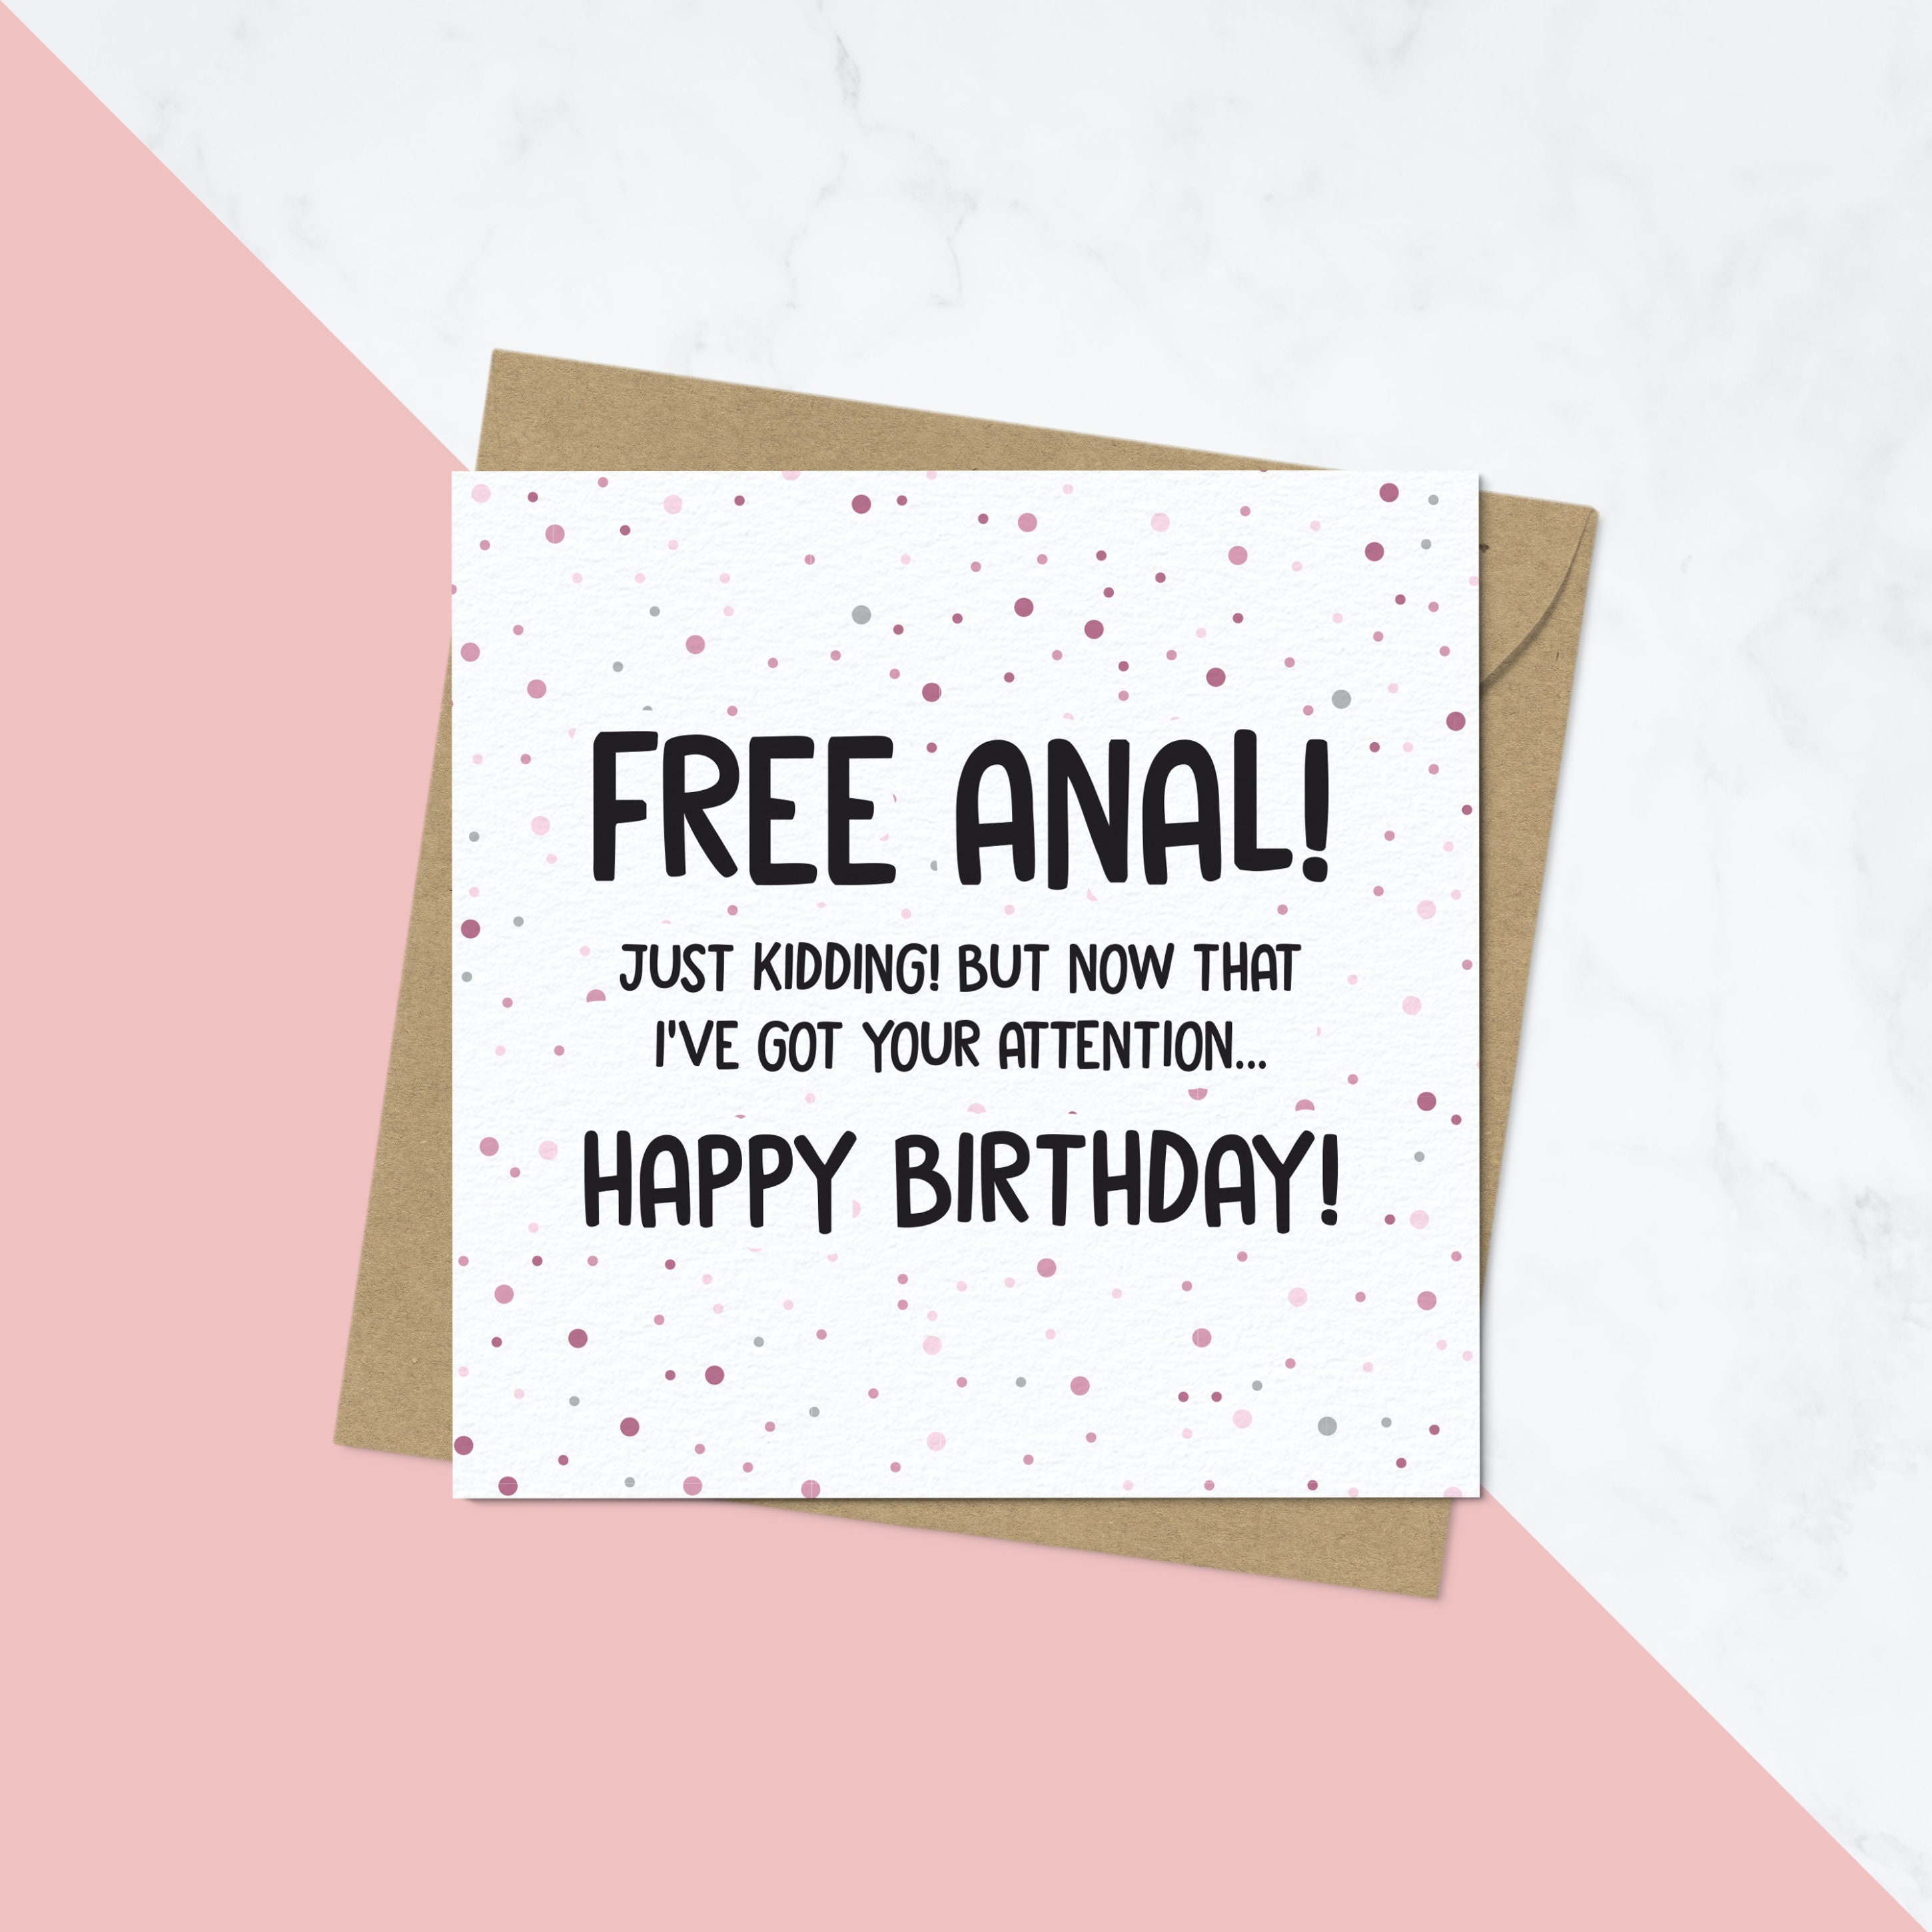 Free adult anal